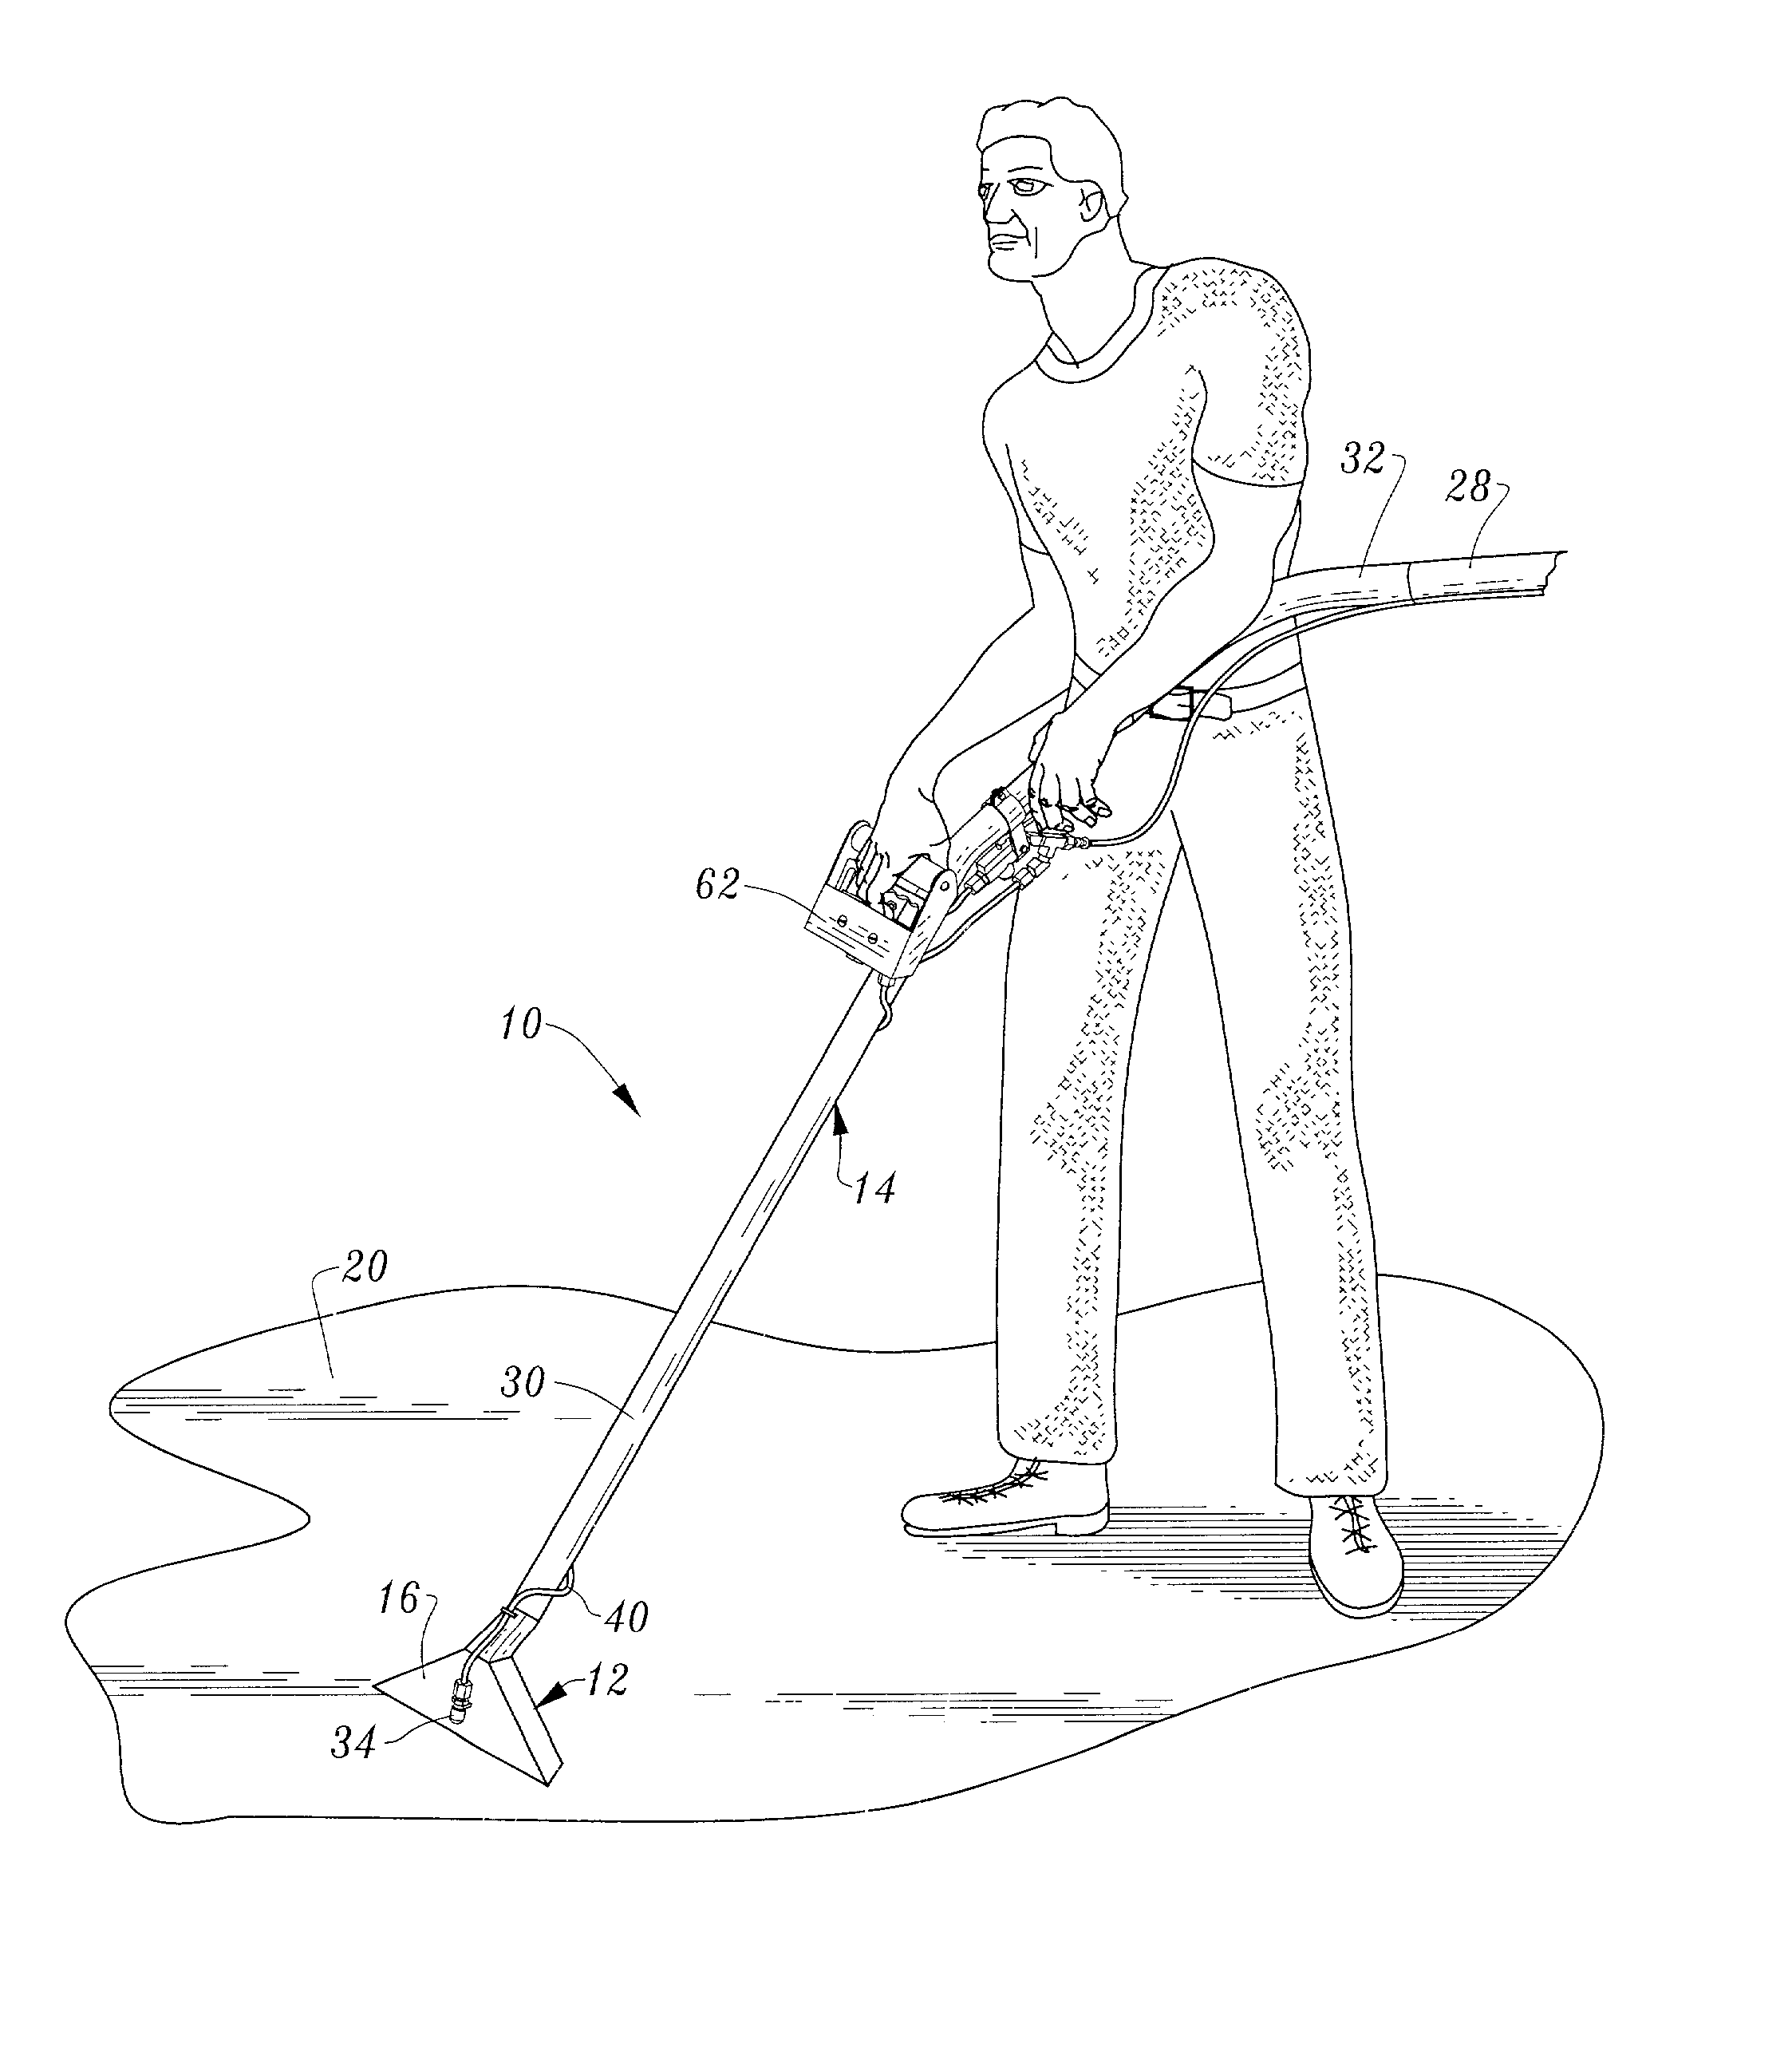 Carpet steam cleaning apparatus with control for directing spray at front or back of wand vacuum head